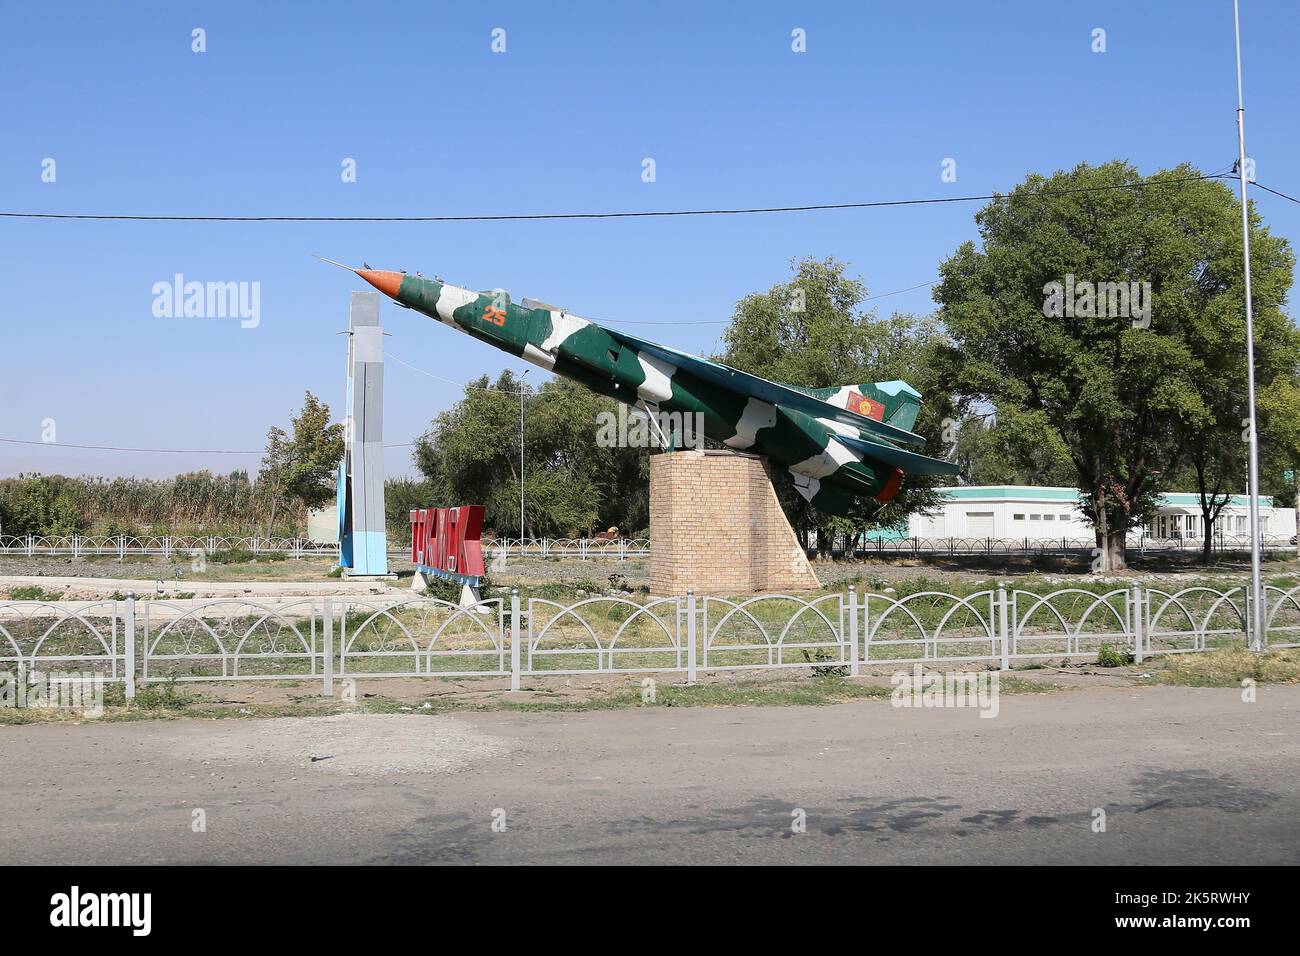 Mikoyan-Gurevich MiG-23MS fighter at road intersection, Tokmok, Chui Valley, Chui Region, Kyrgyzstan, Central Asia Stock Photo